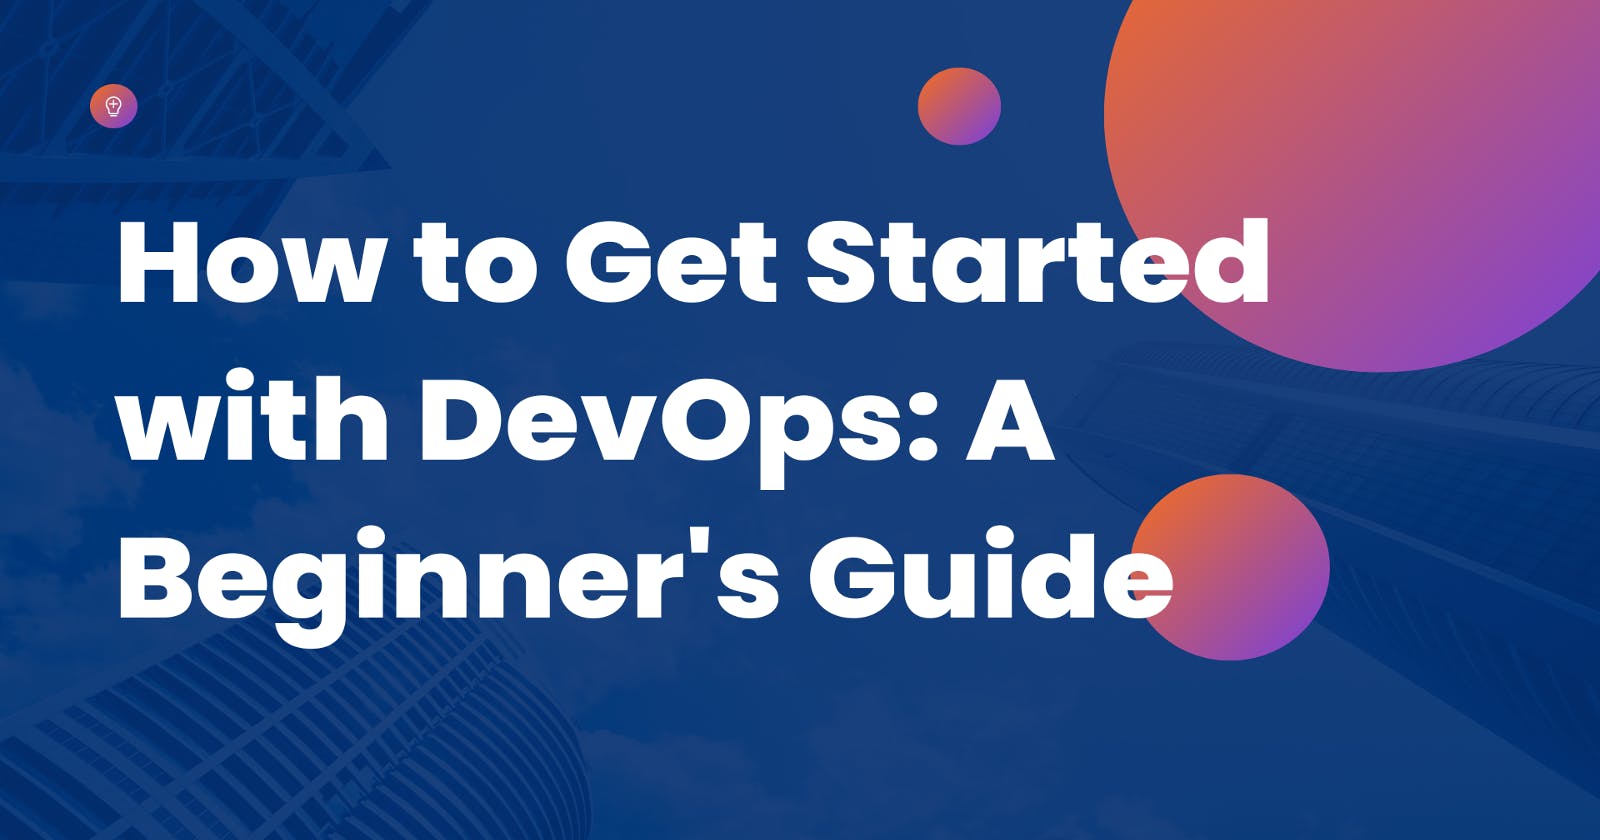 How to Get Started with DevOps: A Beginner's Guide